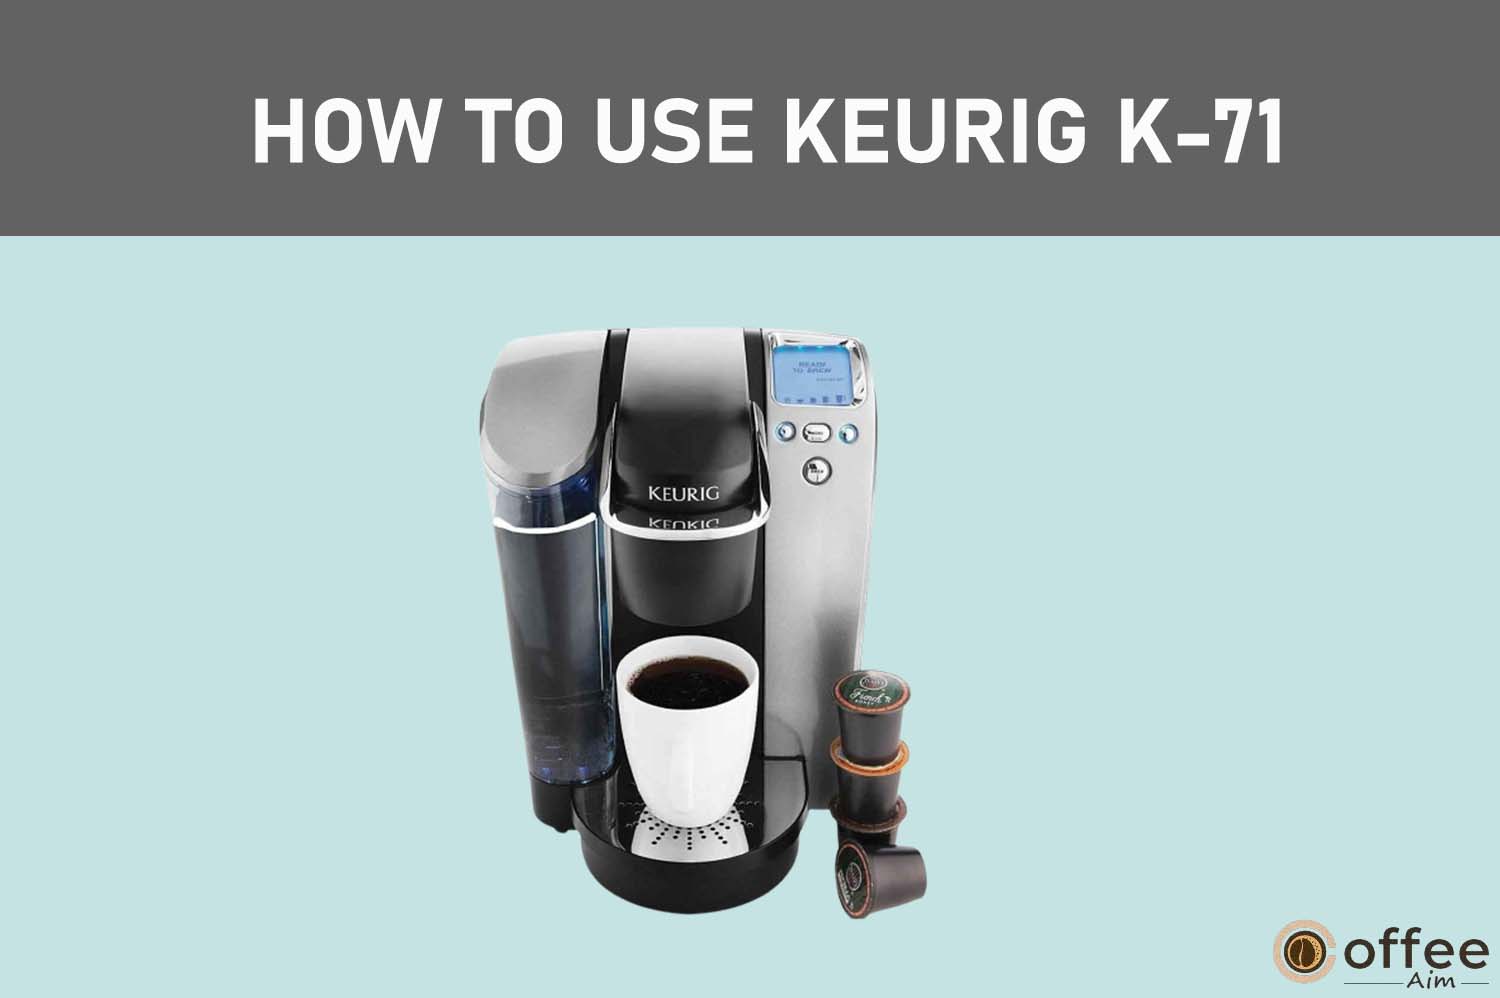 Feature image for the article "How To Use Keurig K-71"